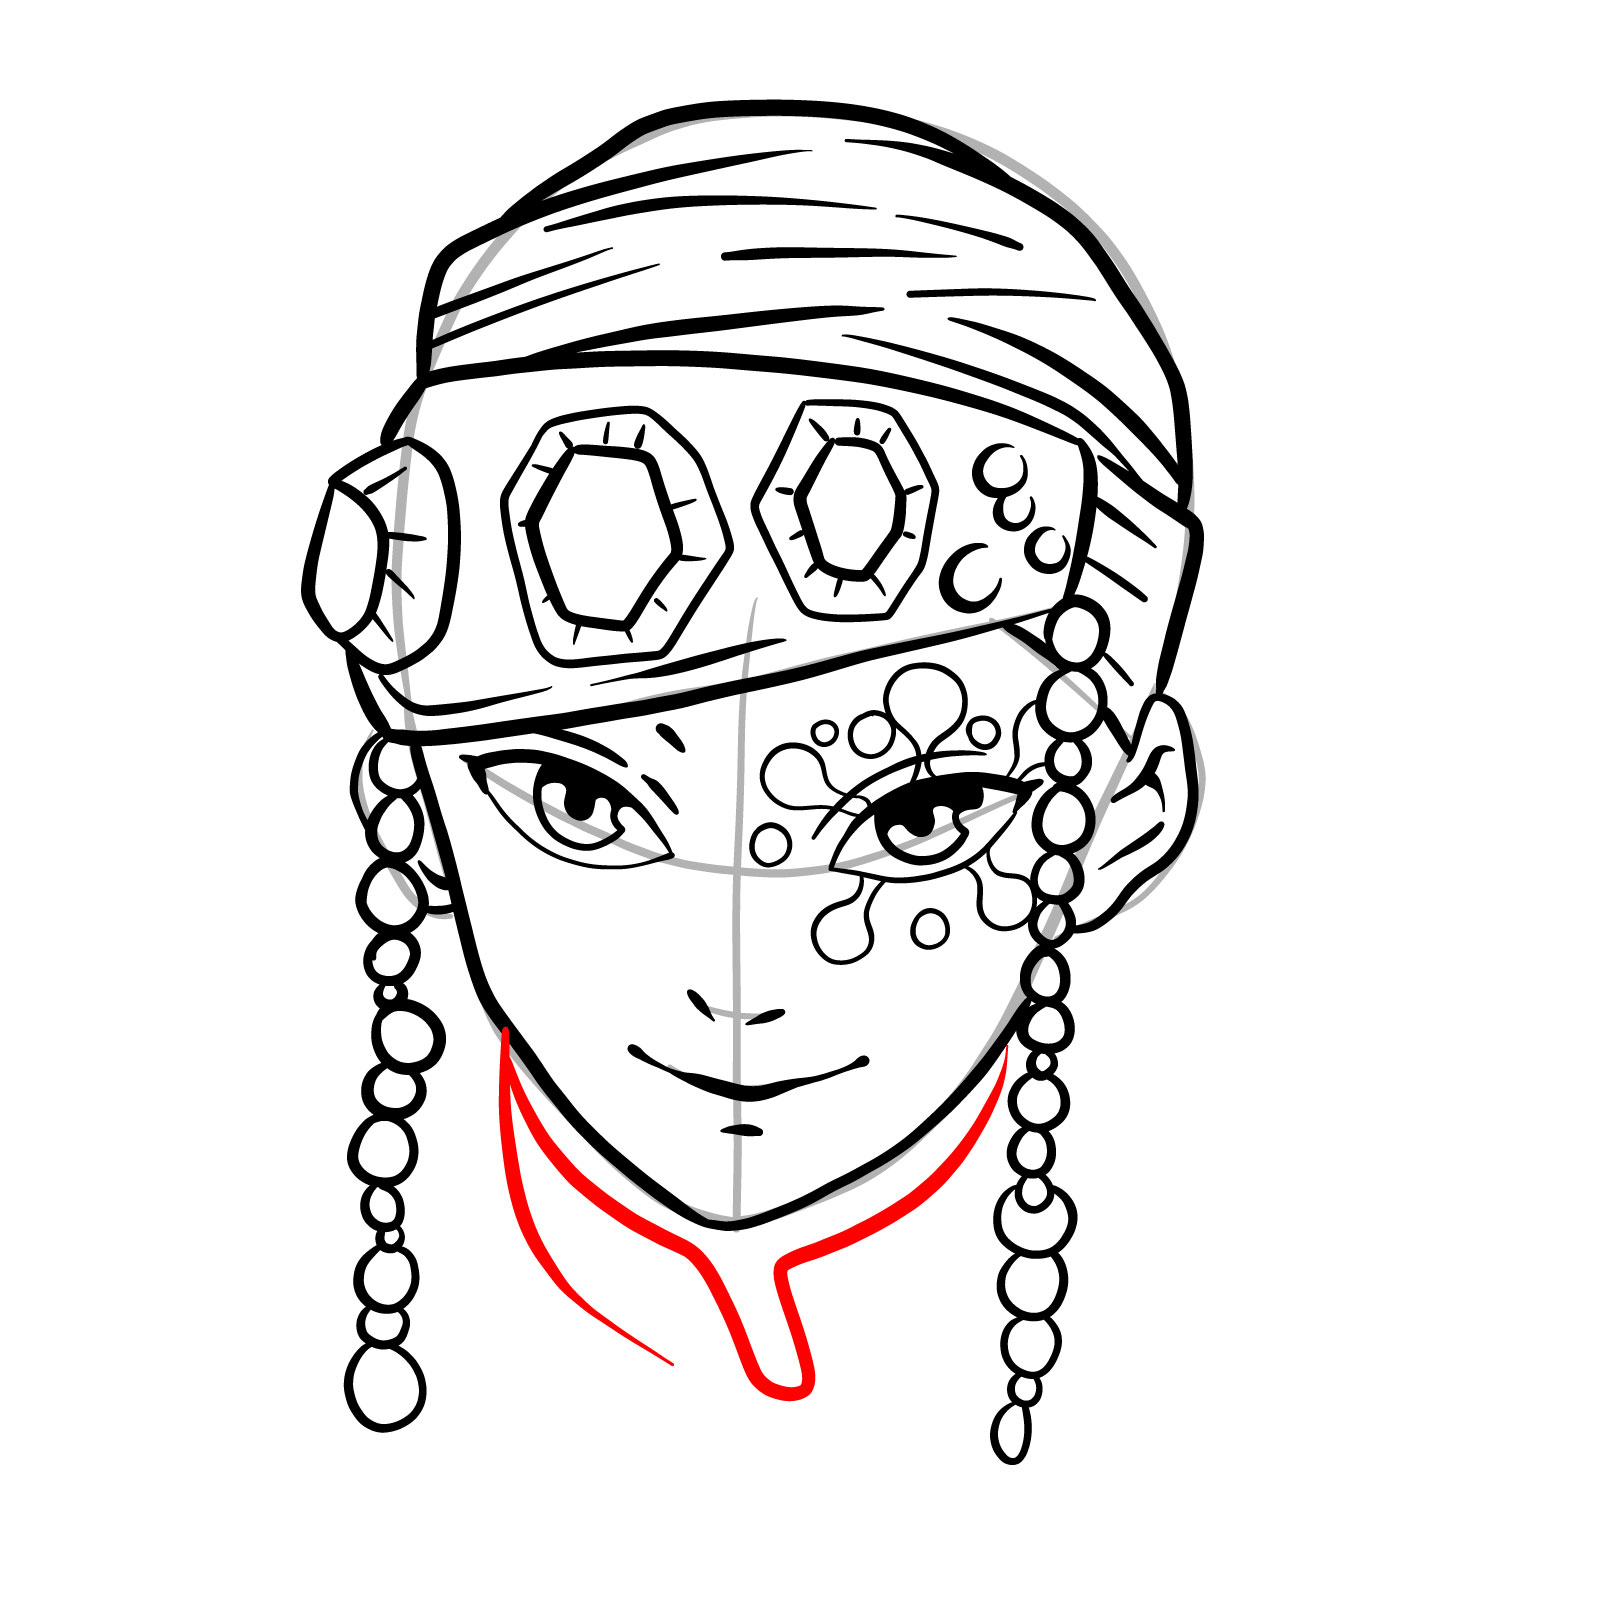 How to draw Lord Tengen's face - step 22